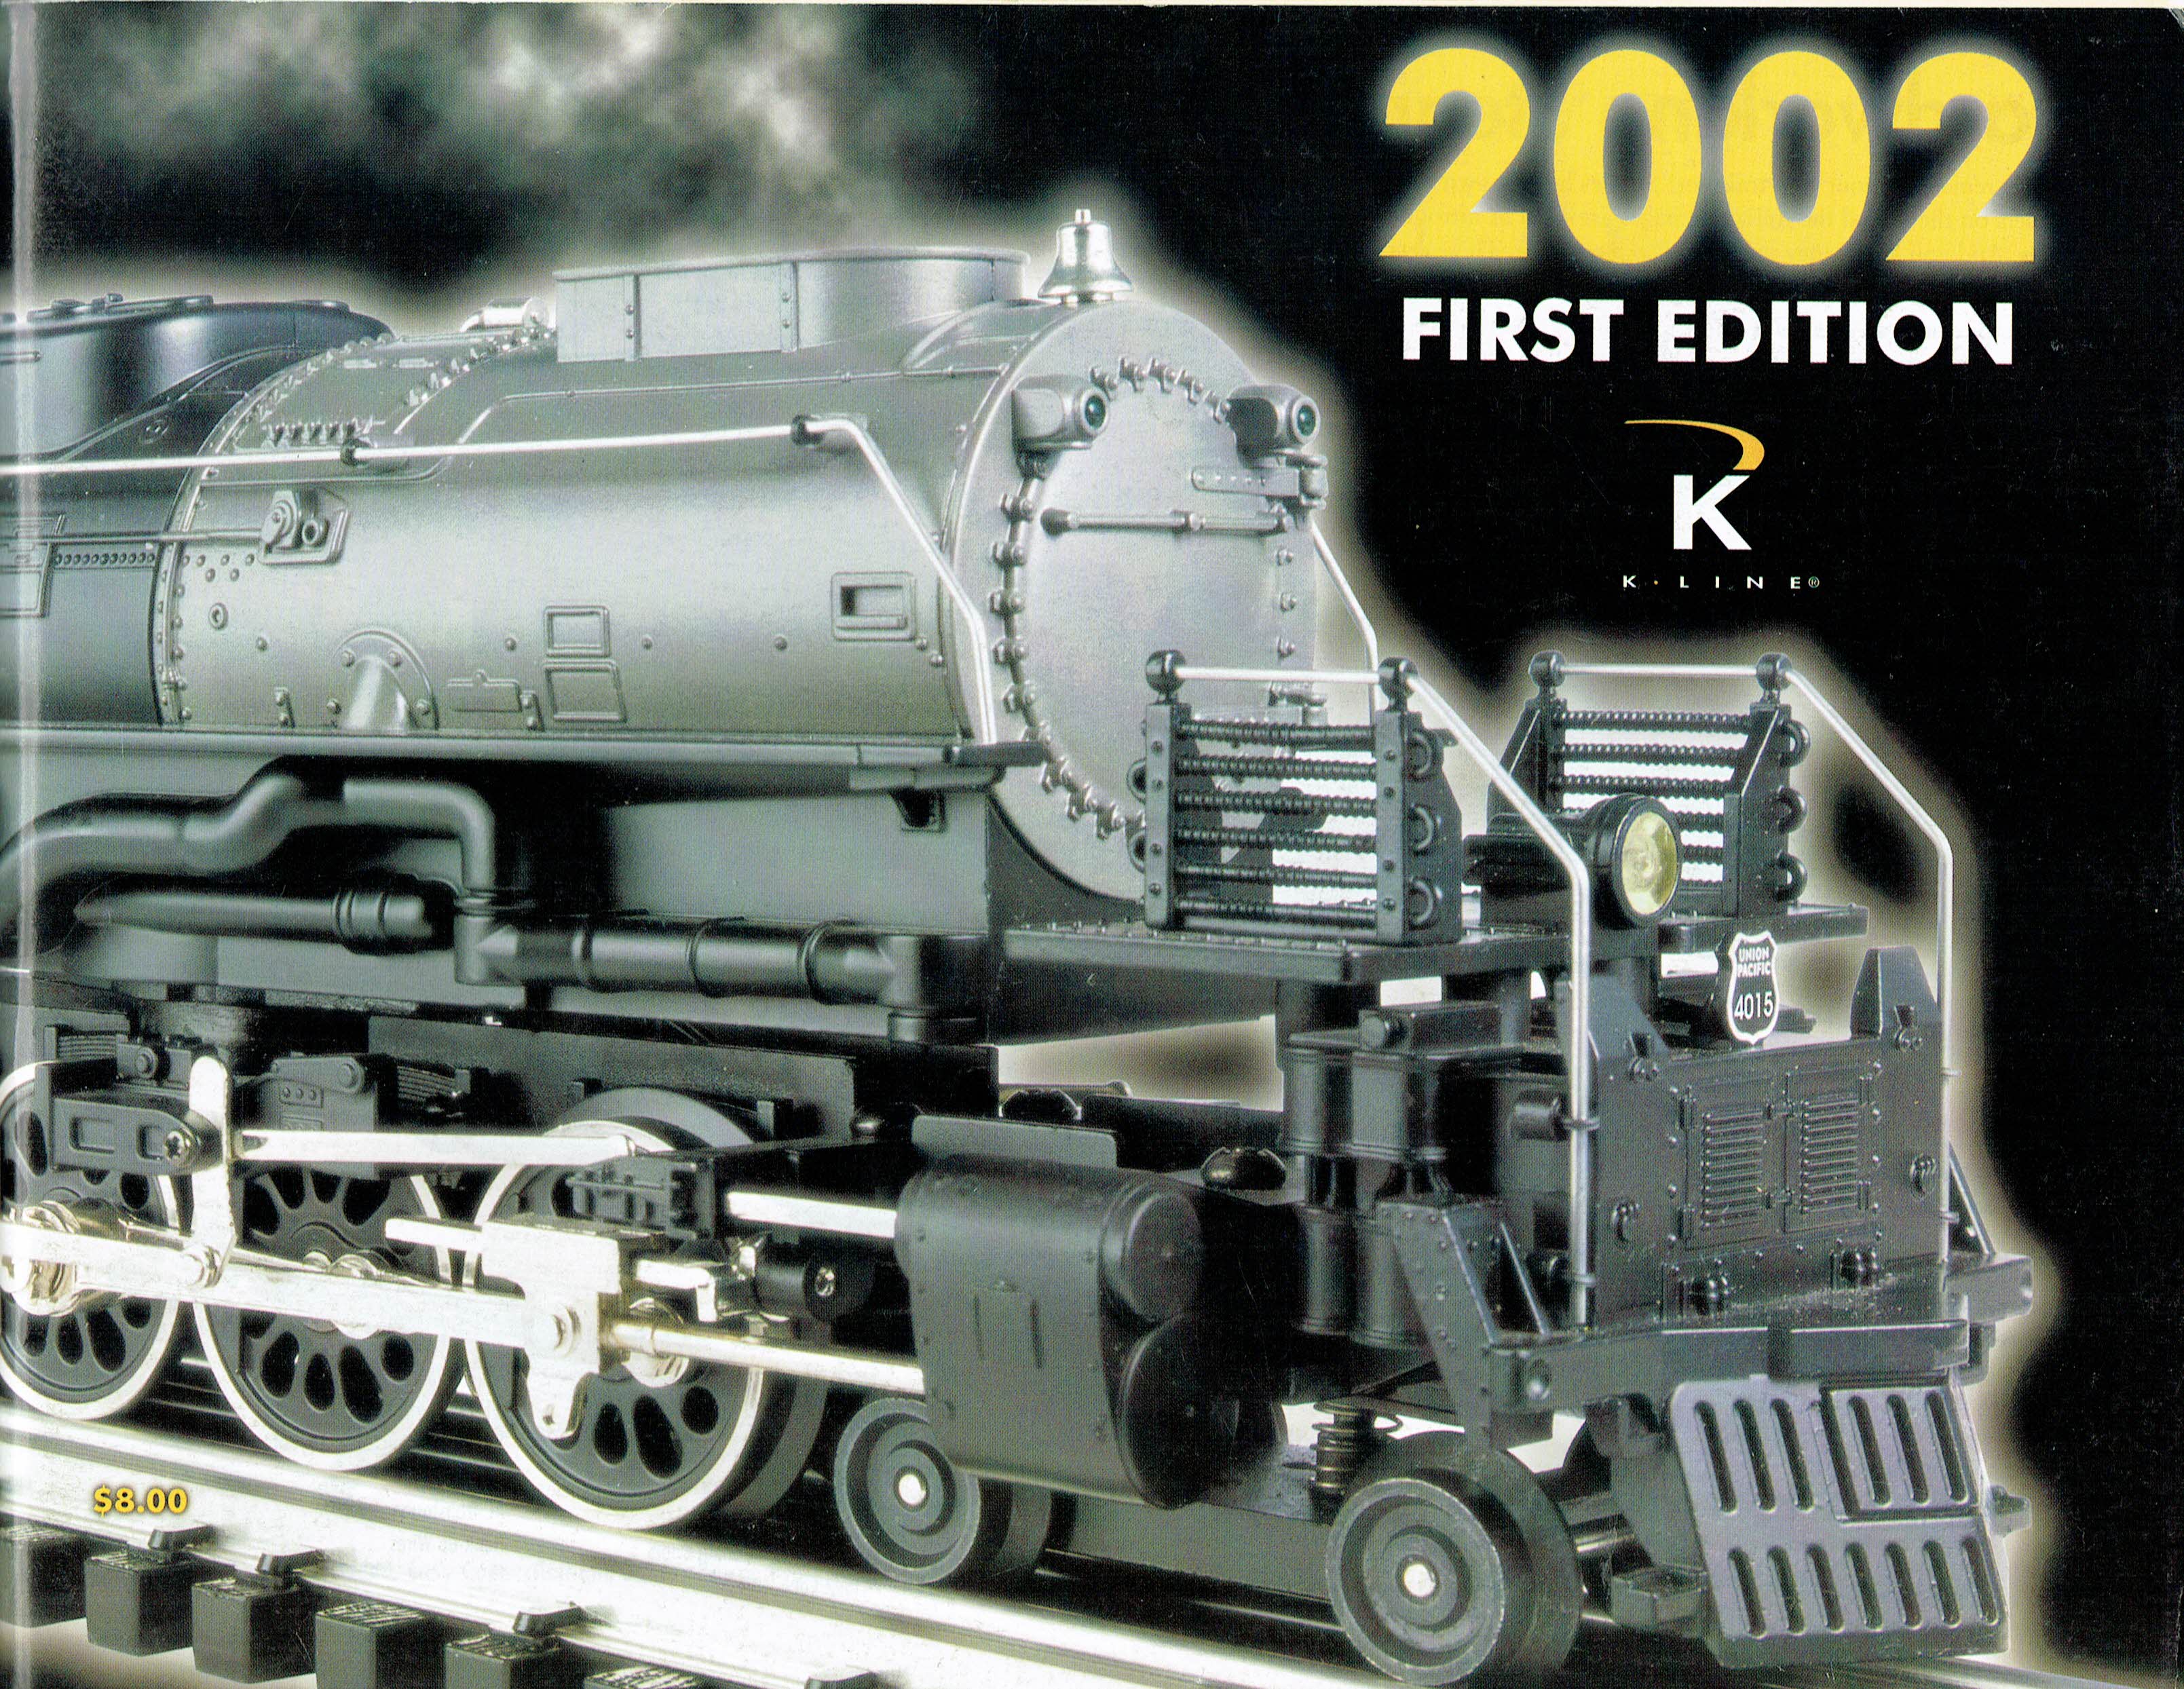 K-Line 2002 First Edition Catalog image